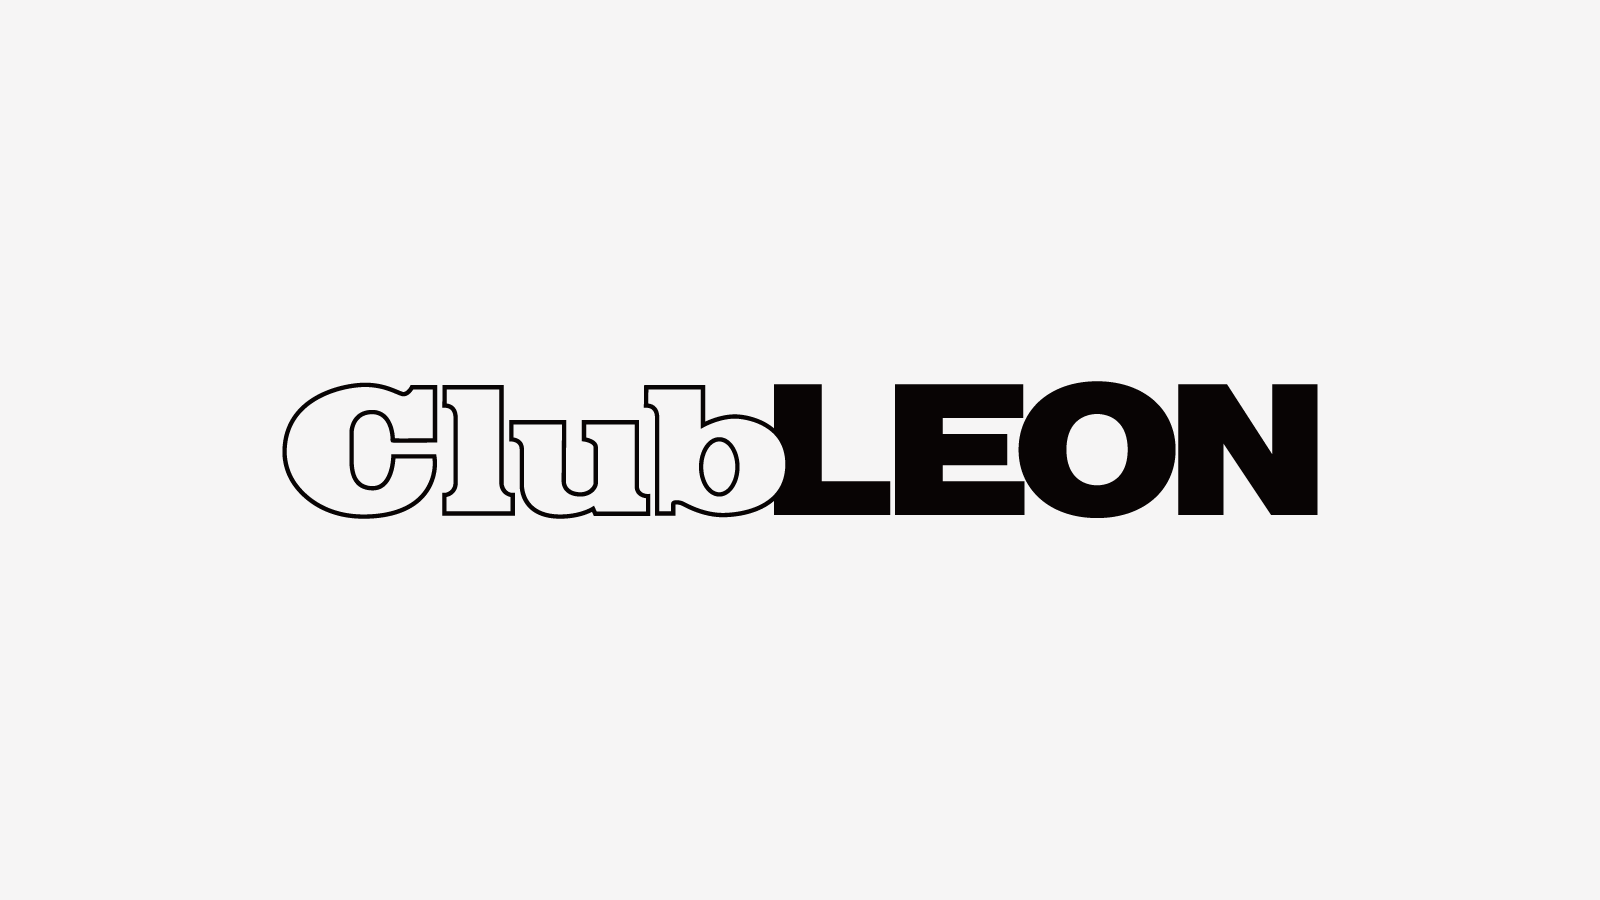 This month's "Club LEON" will be revamped to include everyone!